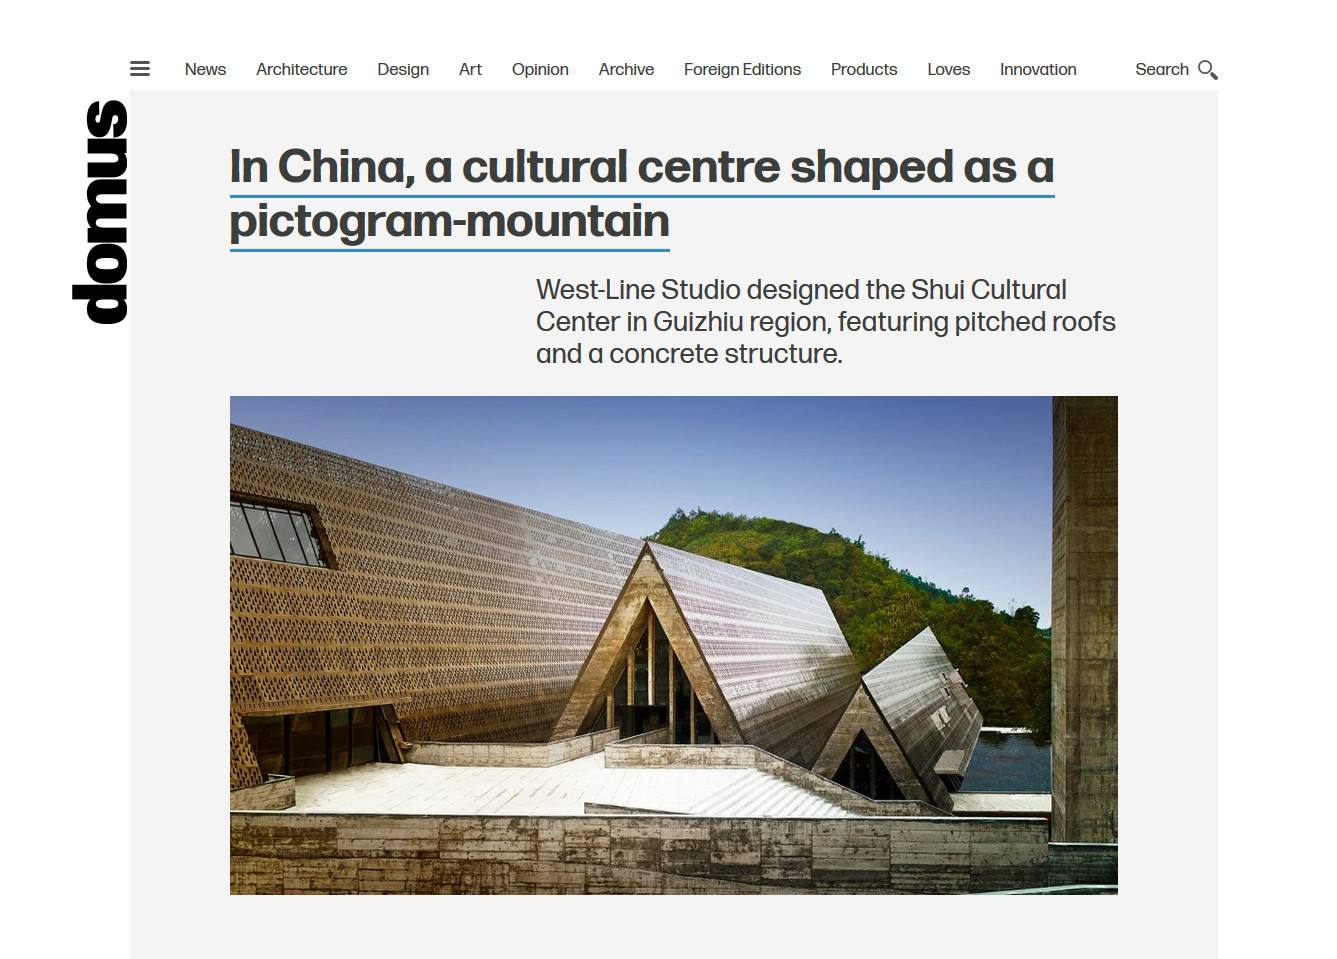 Domus ,the famous magazine in Italy, published "Shui Cultural Center" of West-line Studio